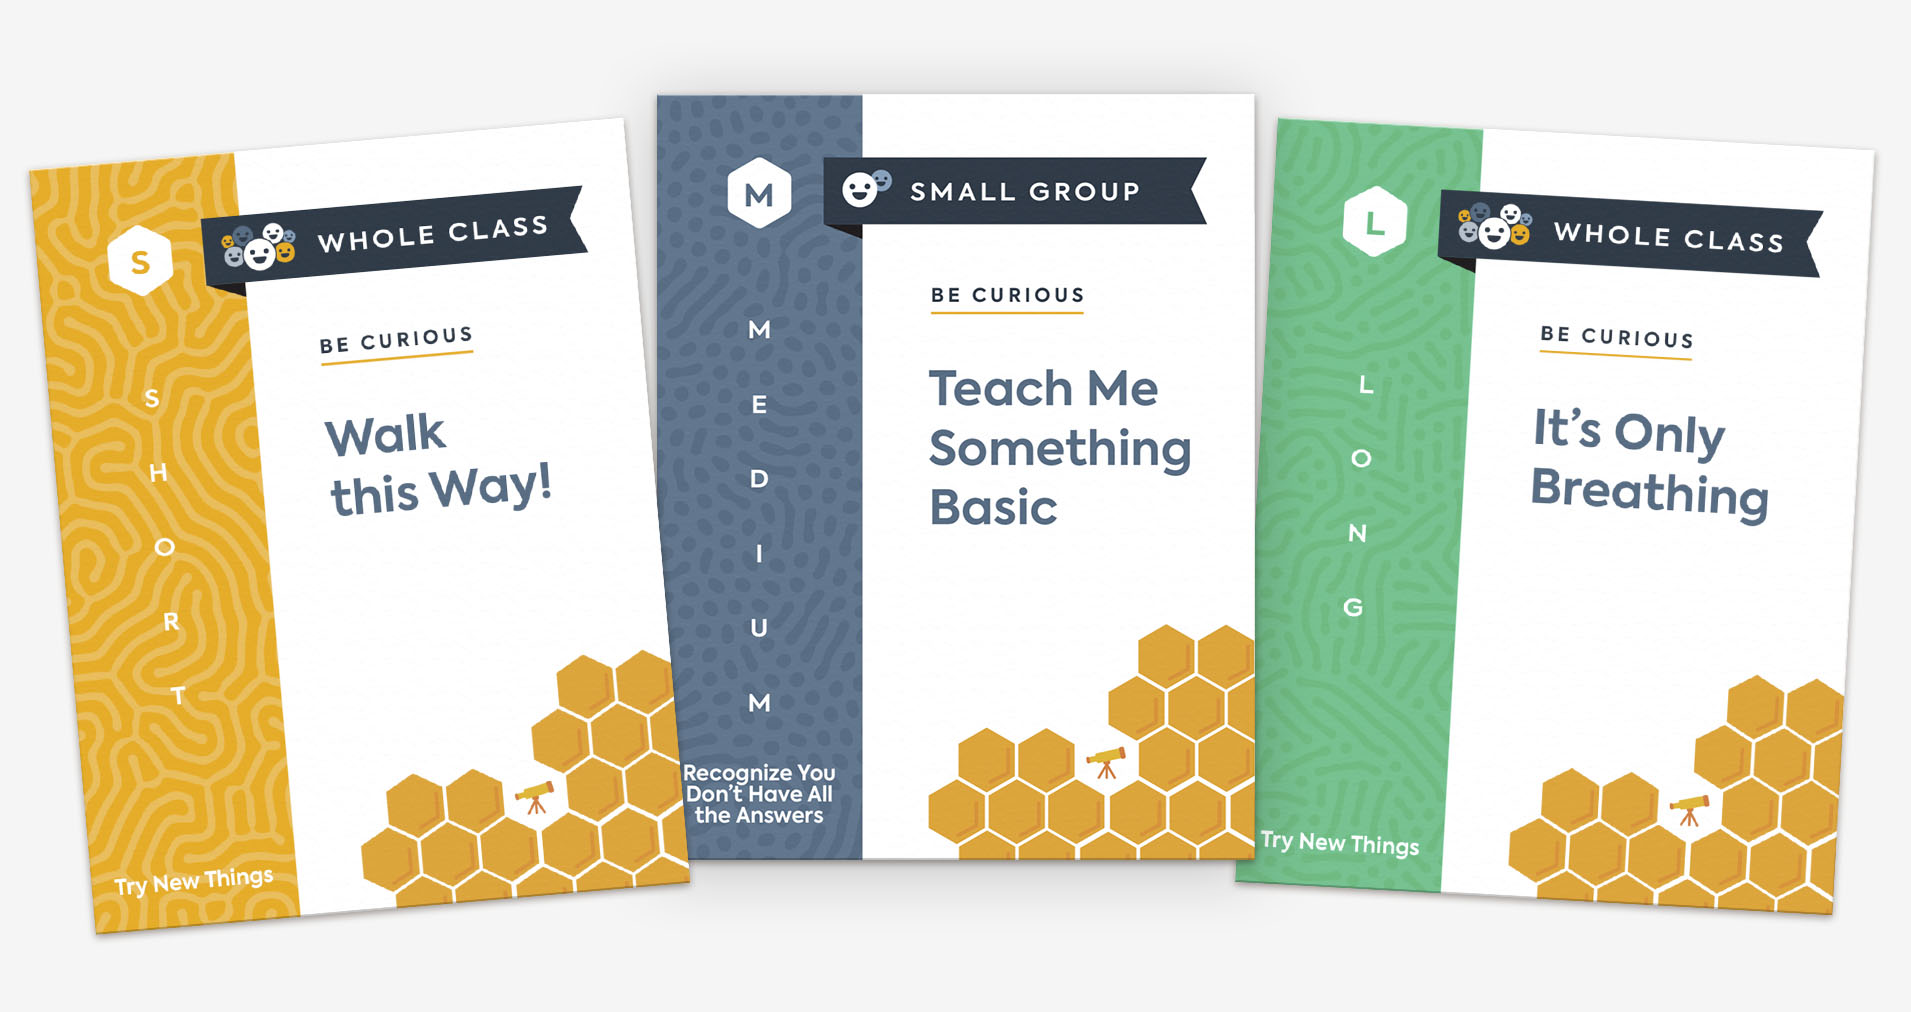 Three practice cards, titled "Walk this Way!," "Teach Me Something Basic," and "It's Only Breathing."